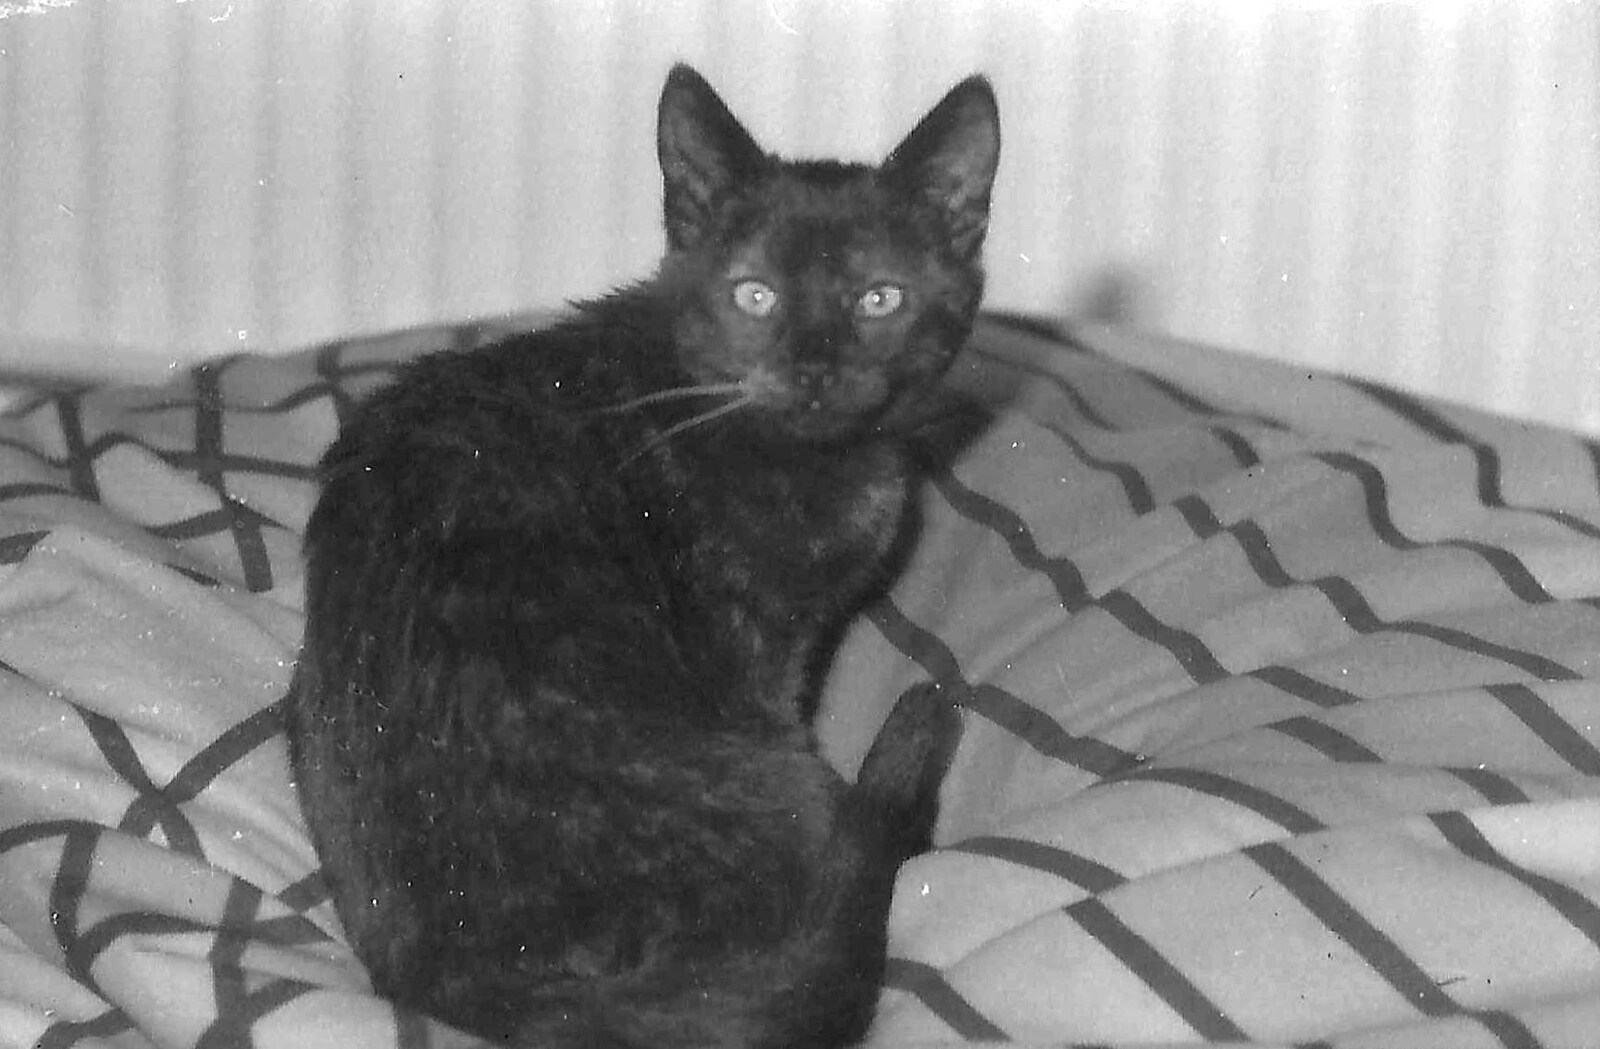 Christmas the kitten from Uni: A Neath Road Summer, St. Jude's, Plymouth - 18th August 1987